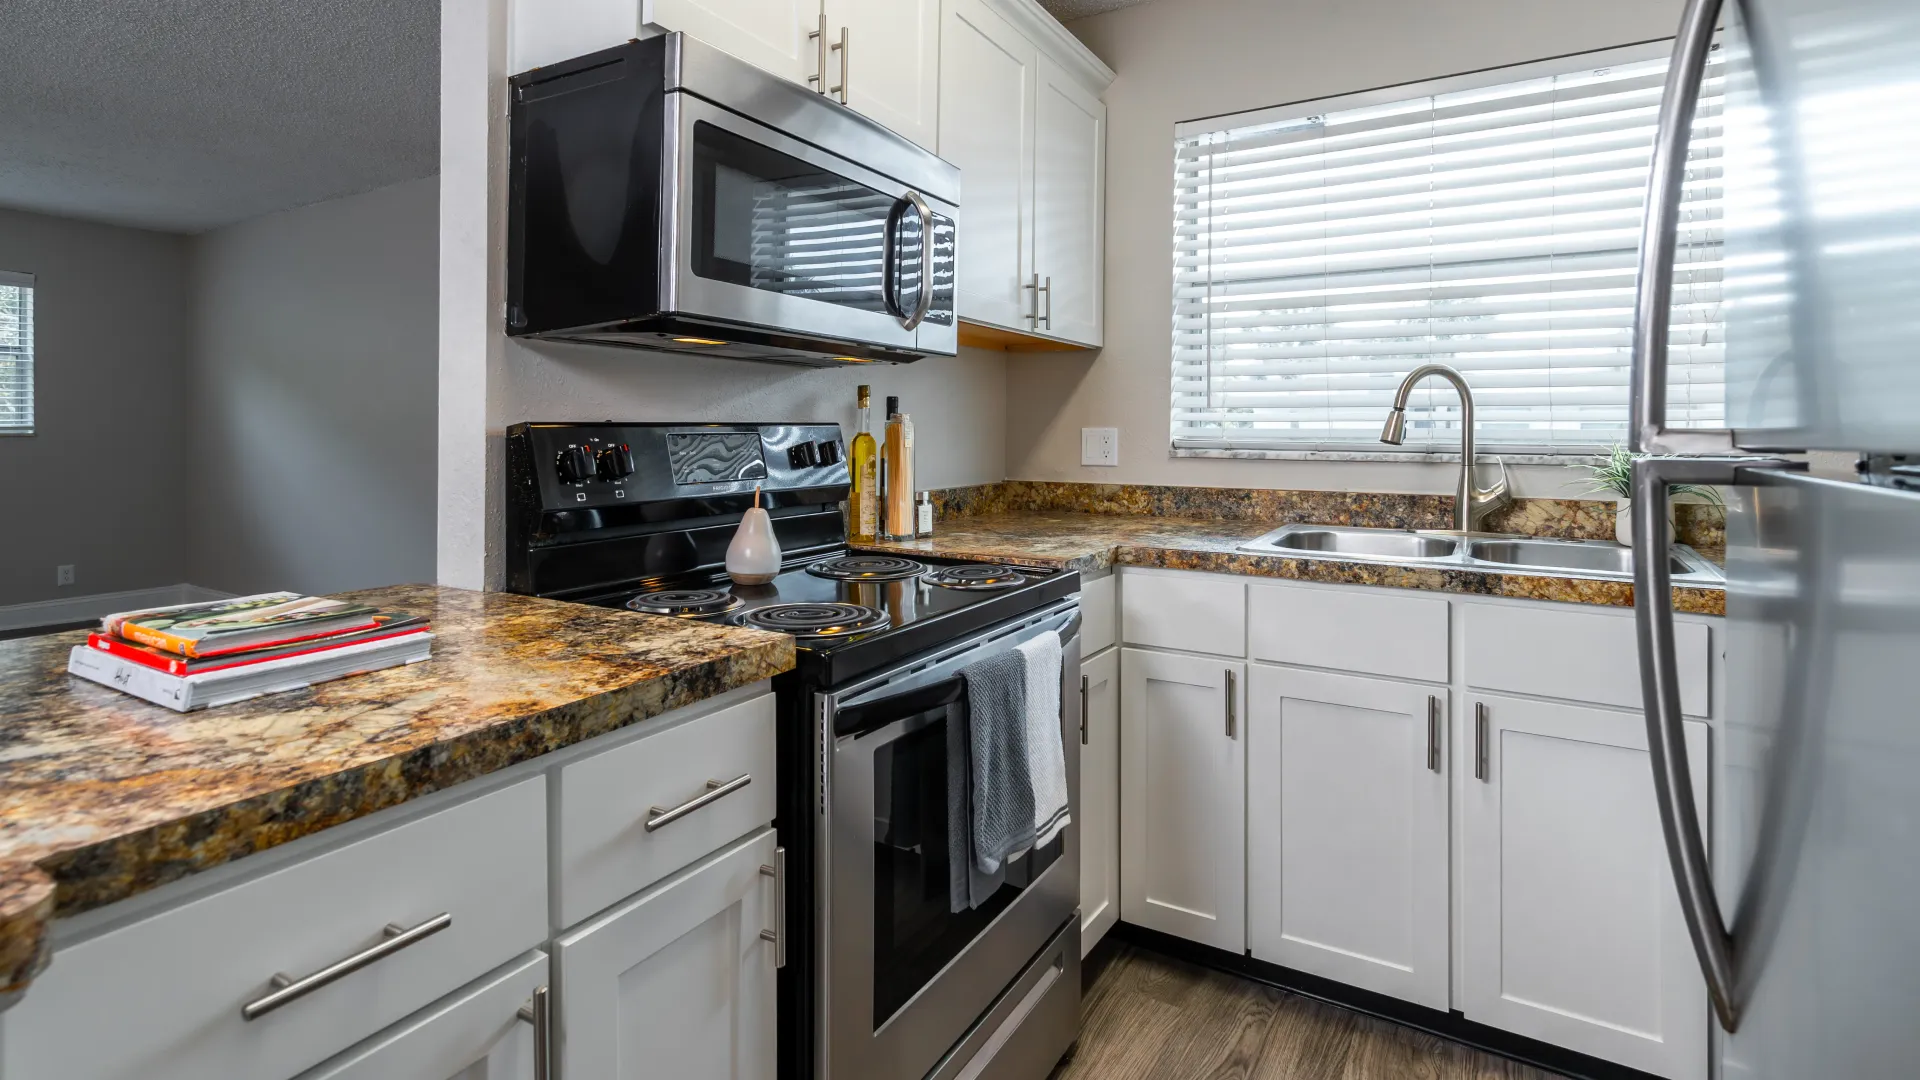  A charming kitchen with a stunning countertop seamlessly extending into a practical prep area and breakfast bar, ideal for mingling and meals.